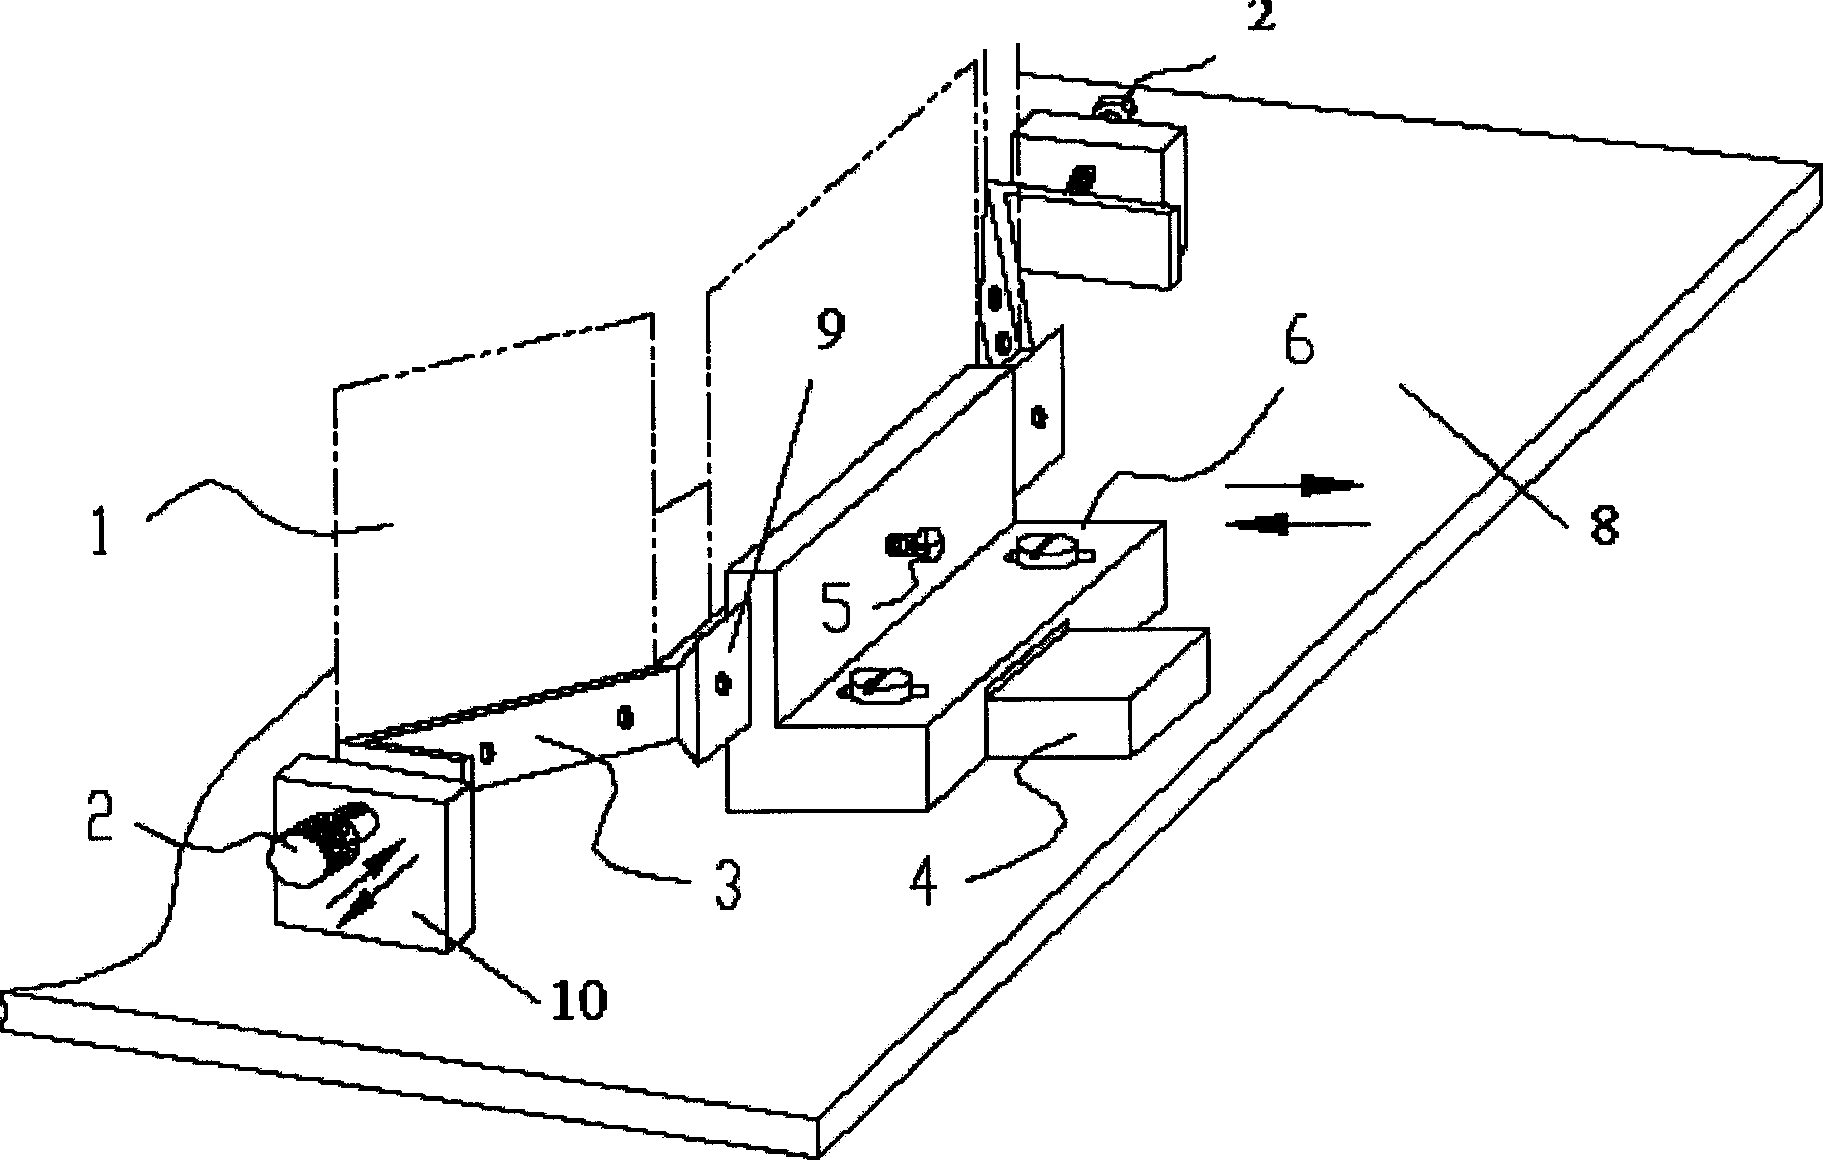 Device for adjusting fixed position of detector